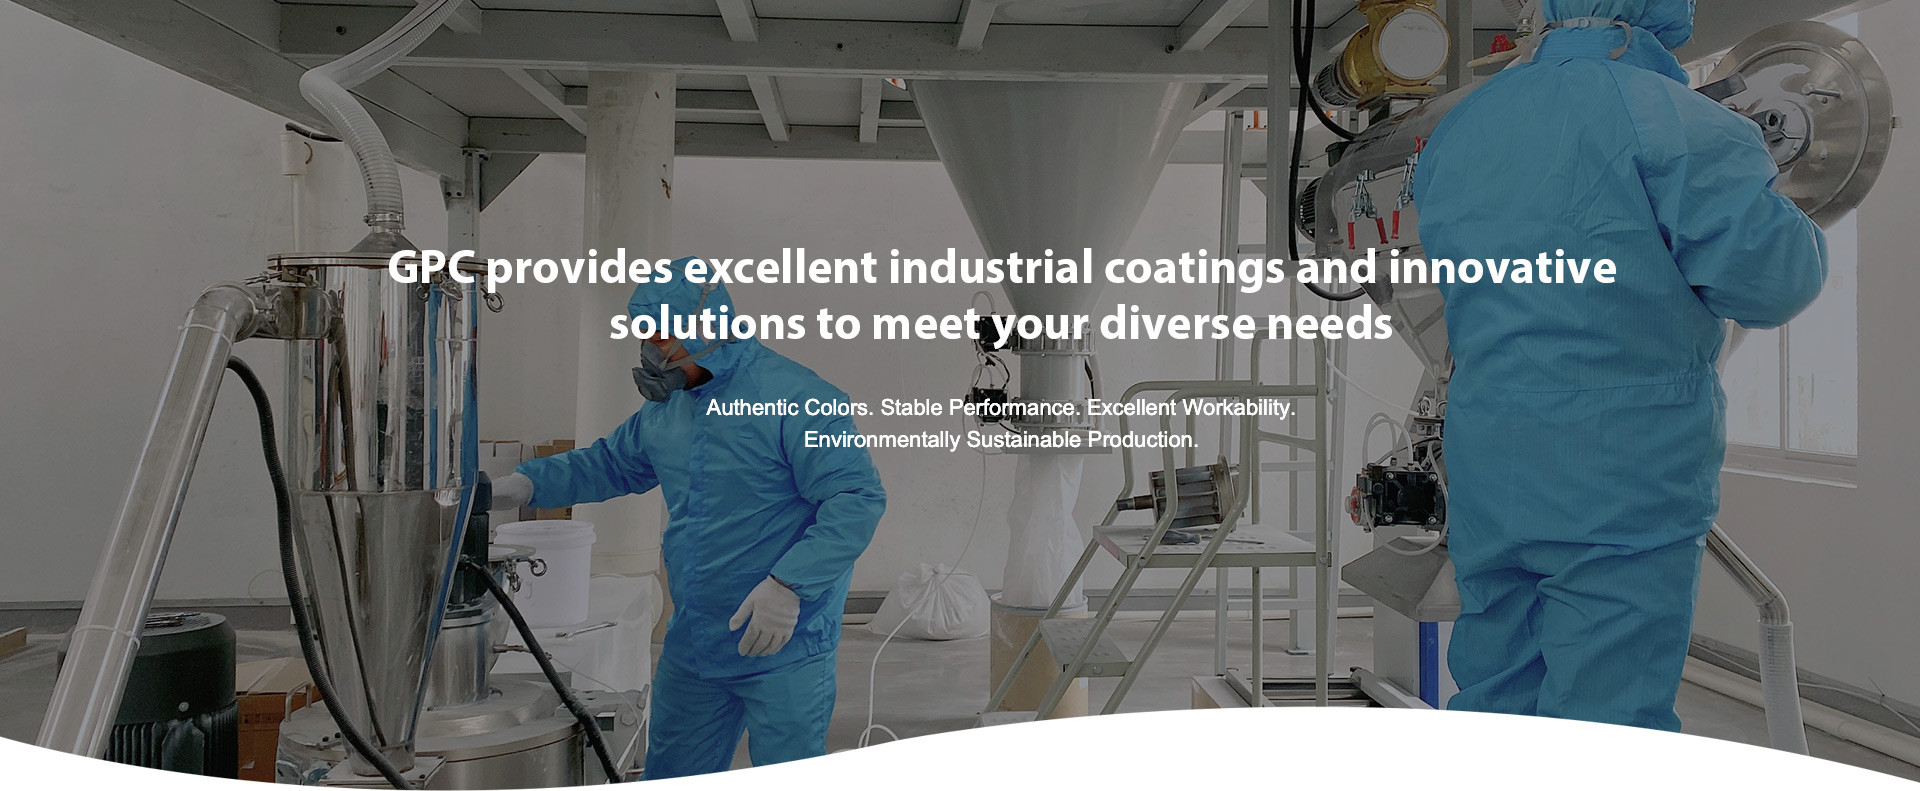 GPC provides excellent industrial coatings and innovative solutions to meet your diverse needs